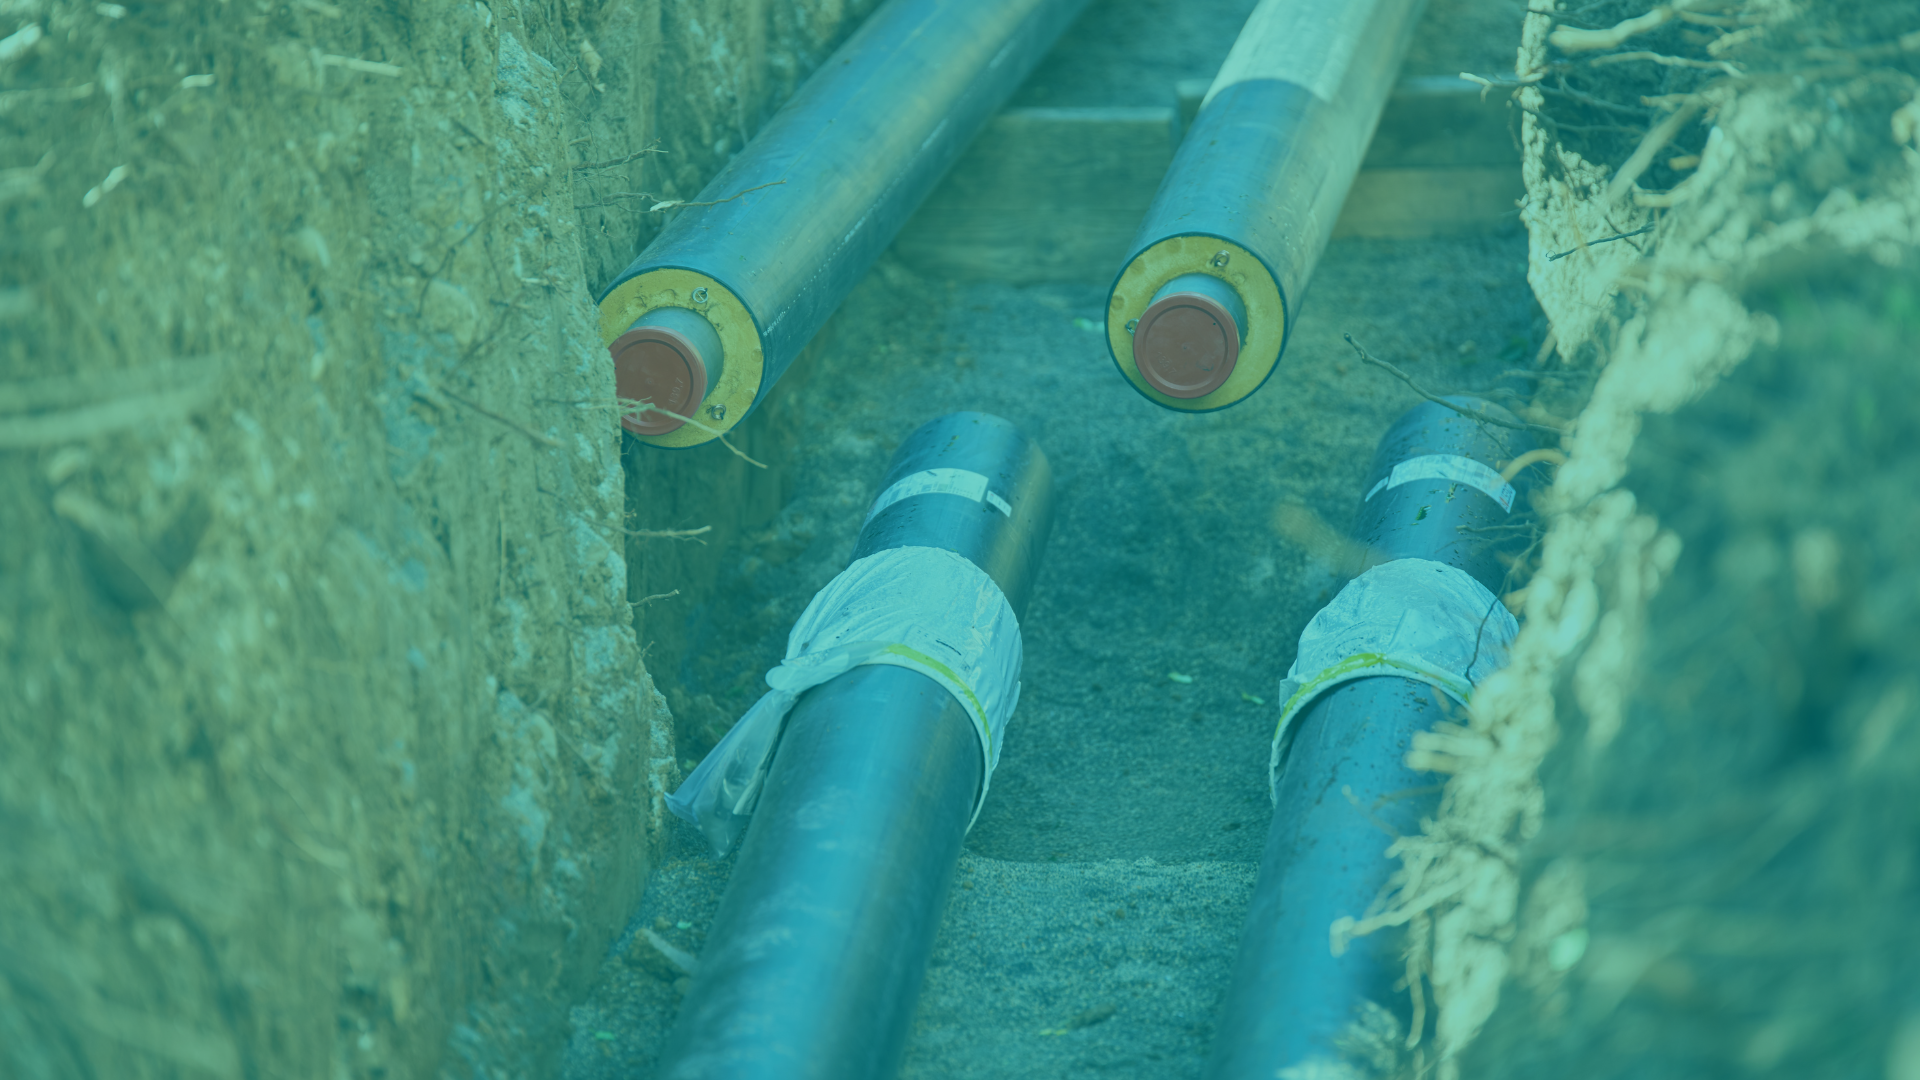 An image of insulated underground pipes used for district heating